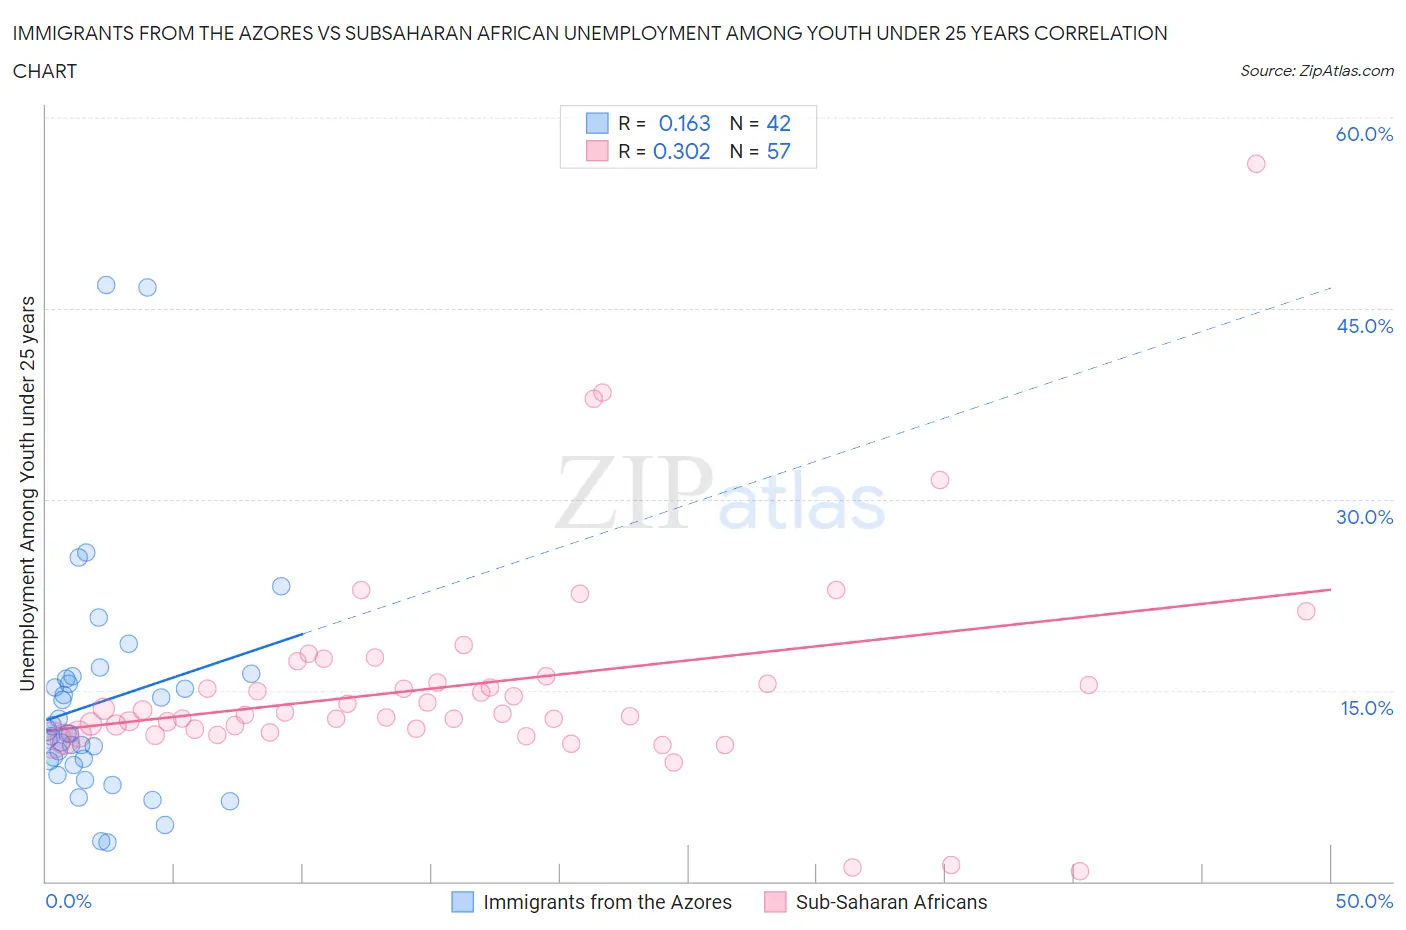 Immigrants from the Azores vs Subsaharan African Unemployment Among Youth under 25 years